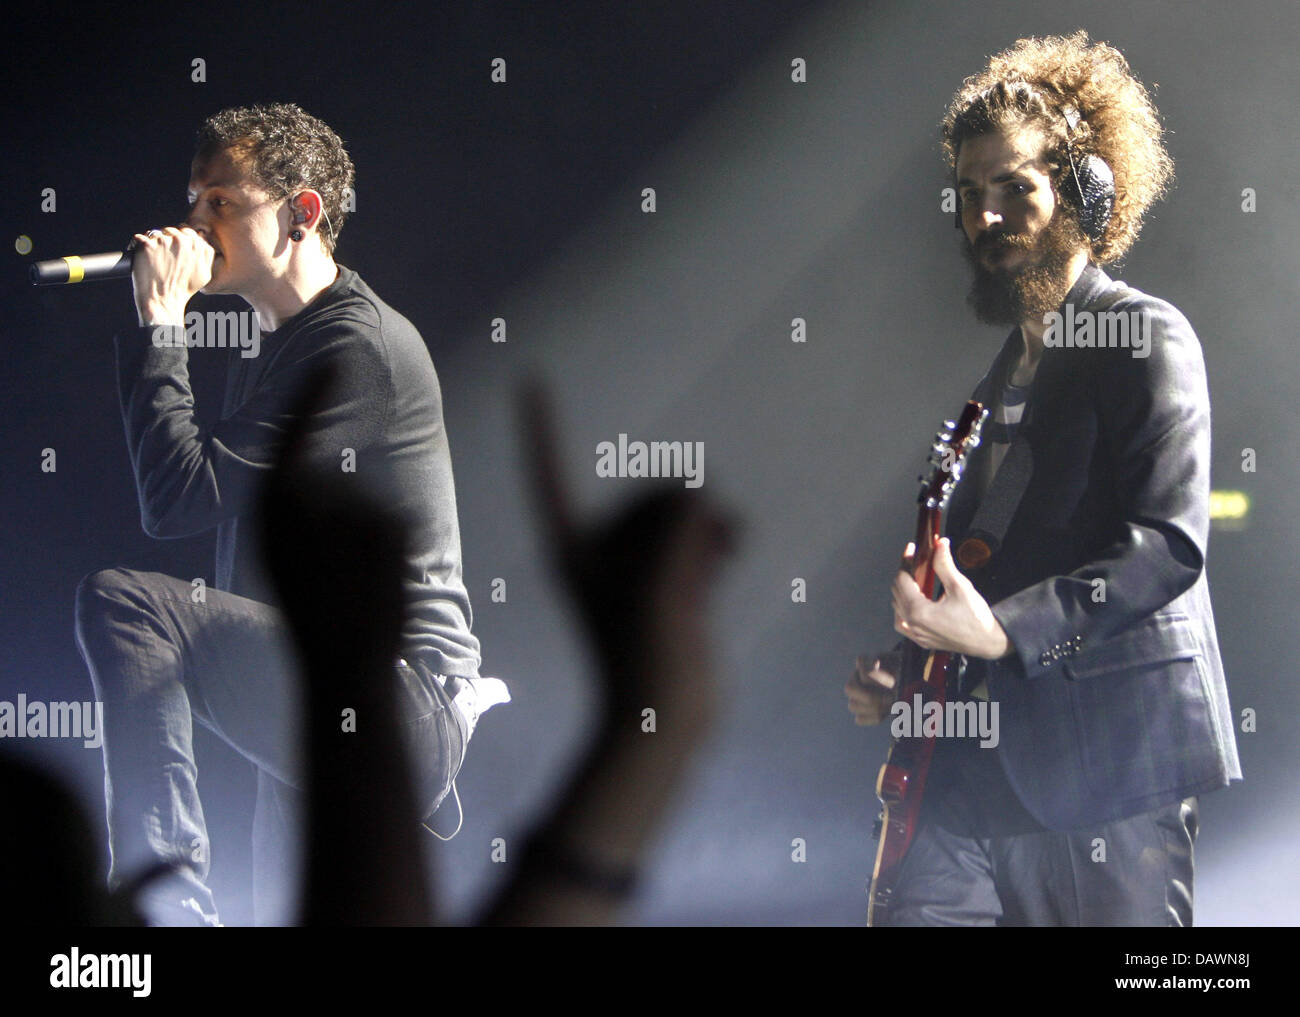 Chester Bennington (L), shouter of US rock band Linkin Park, and guitarist Brad Delson (R) pictured during a show in Hamburg, Germany, 27 May 2007. The band continues their German tour with the festivals Rock am Ring and Rock im Park on 01 and 02 June. Photo: Sebastian Widmann Stock Photo